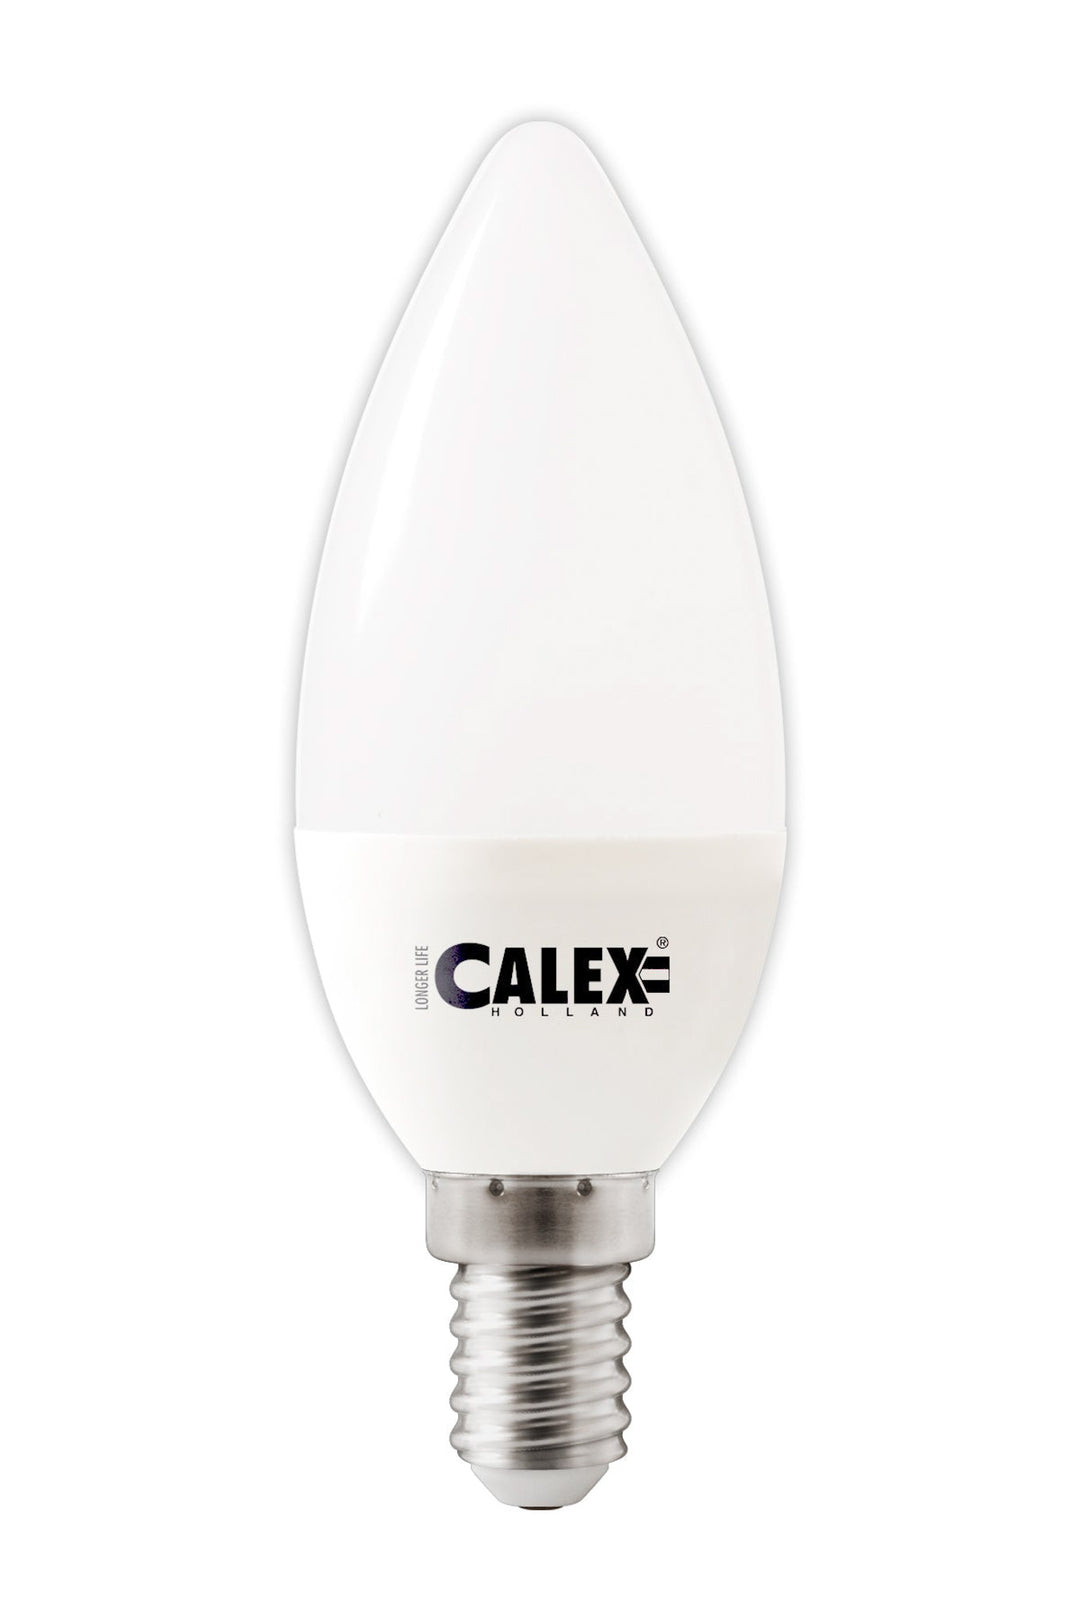 Calex LED SMD Candle Lamp B38, Flame, E14, Non-Dimmable 1301006700